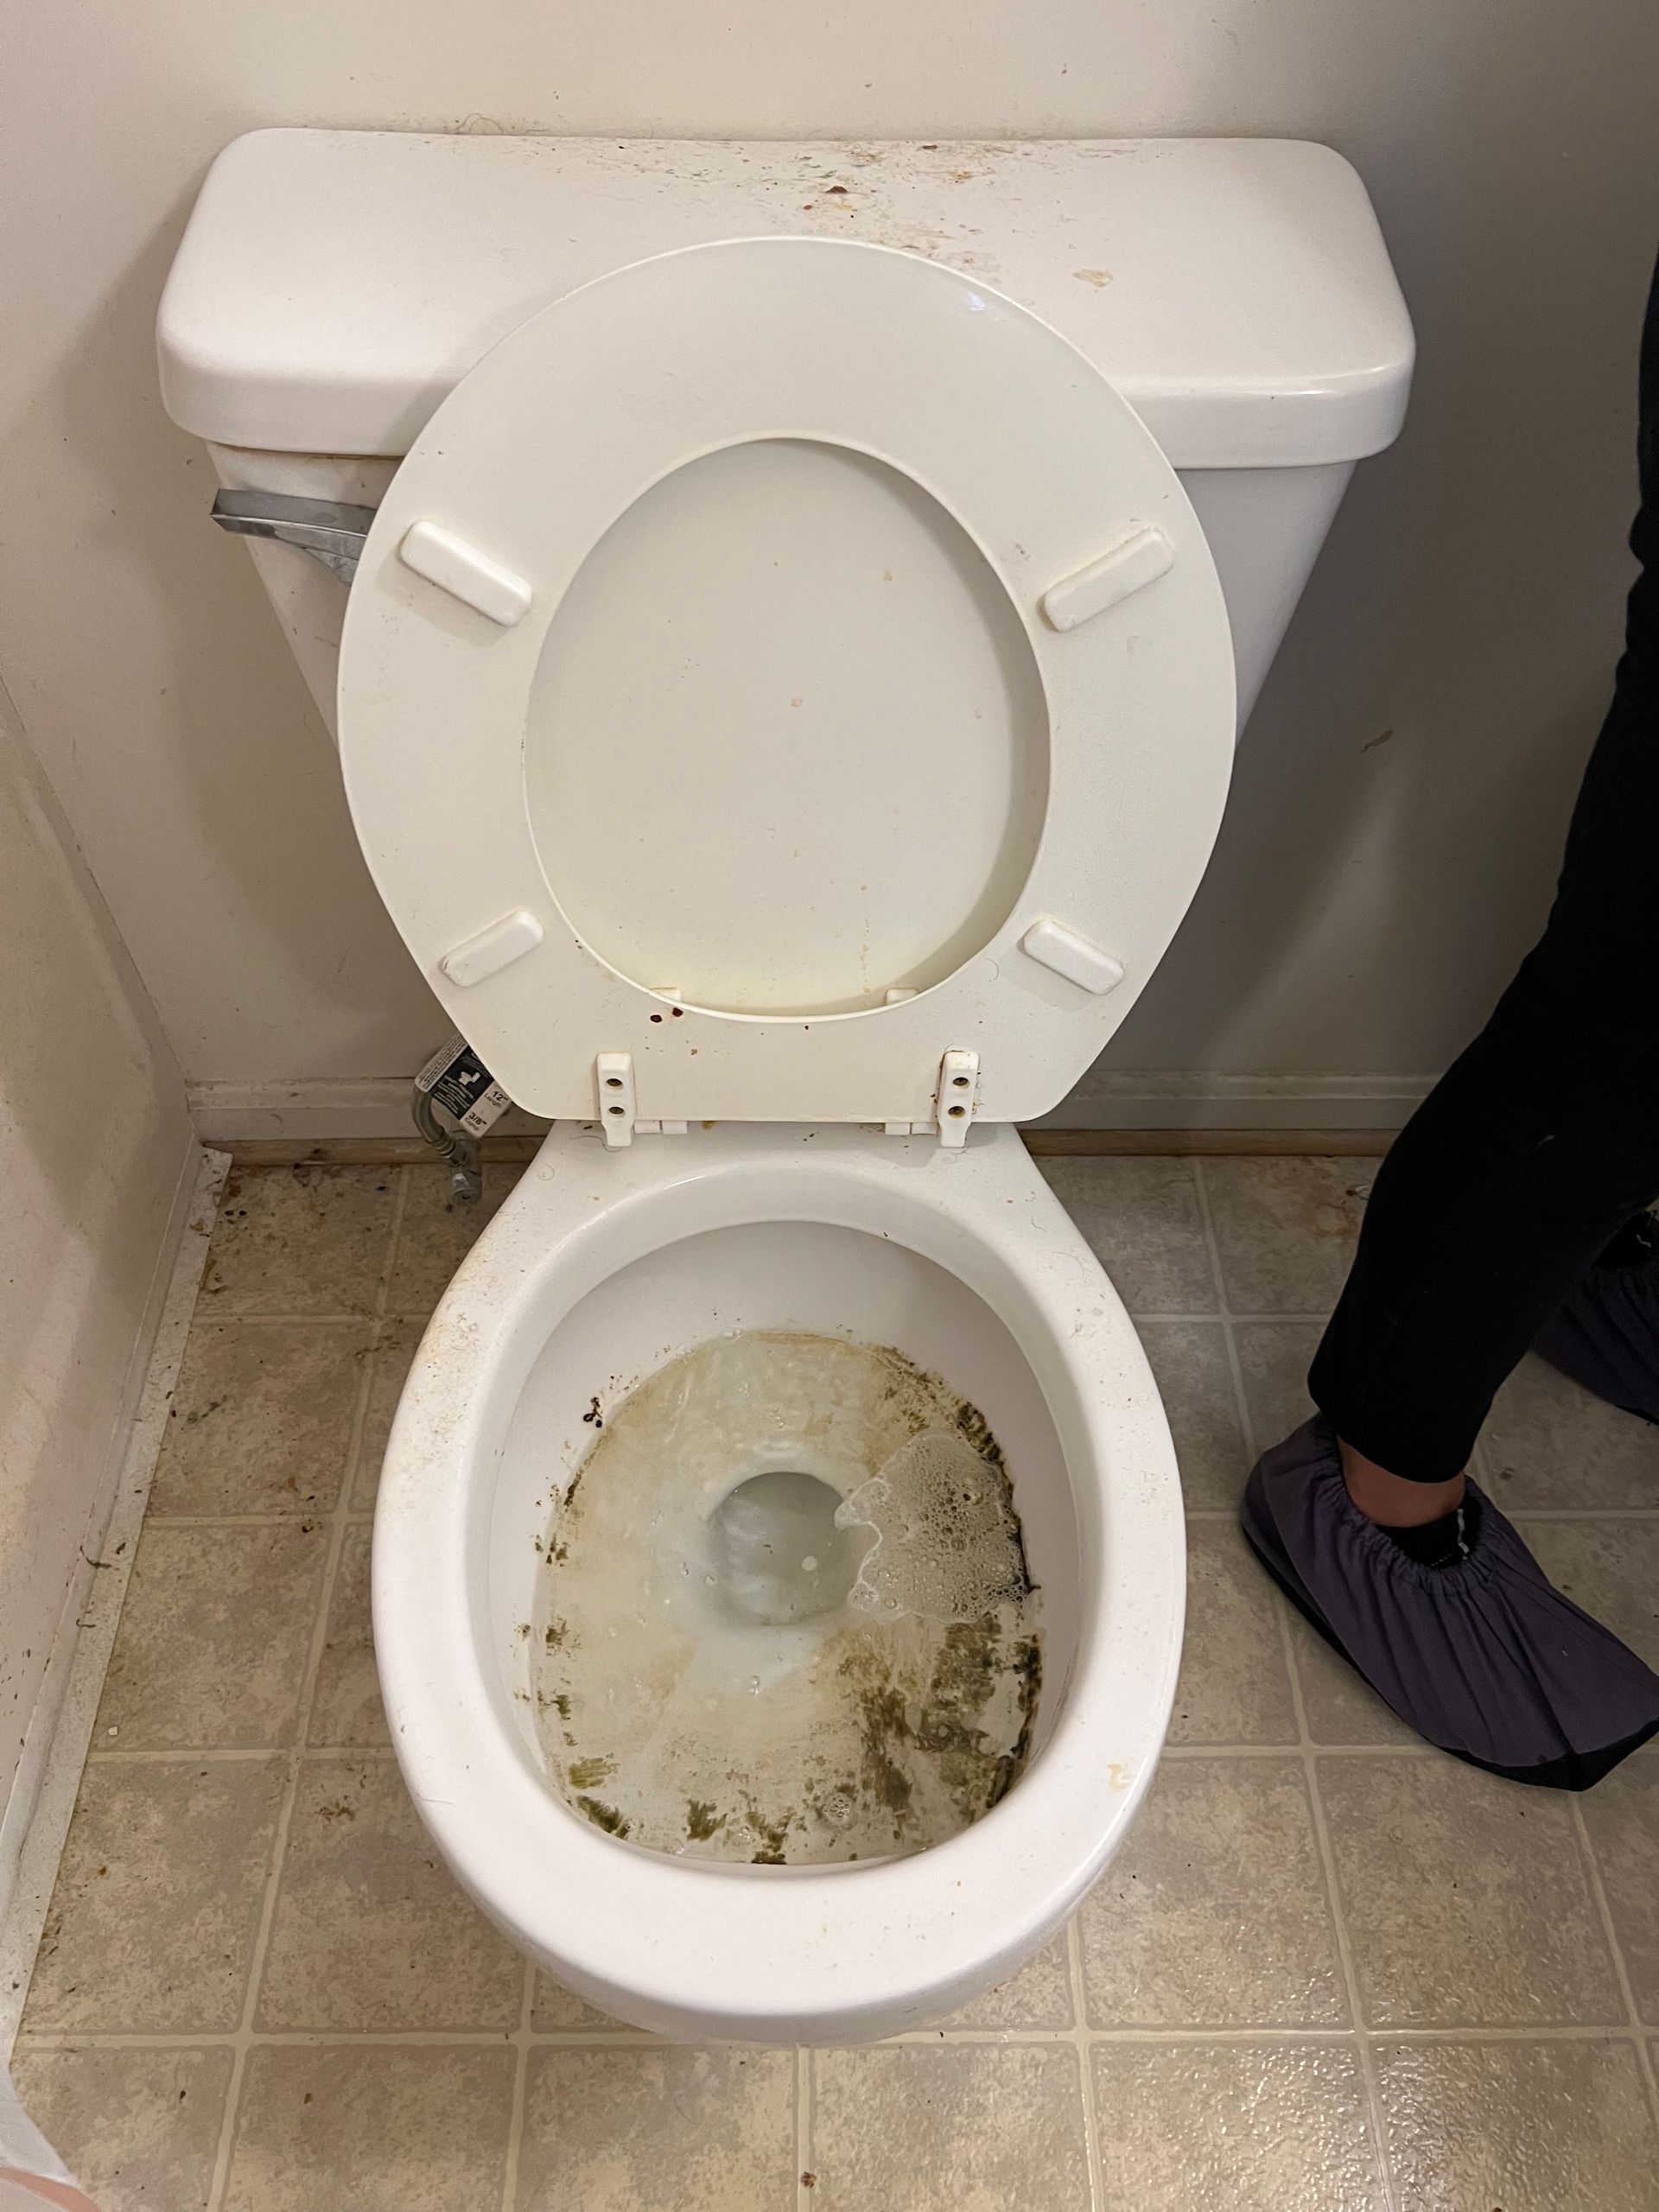 a dirty toilet in a bathroom with a person standing next to it .